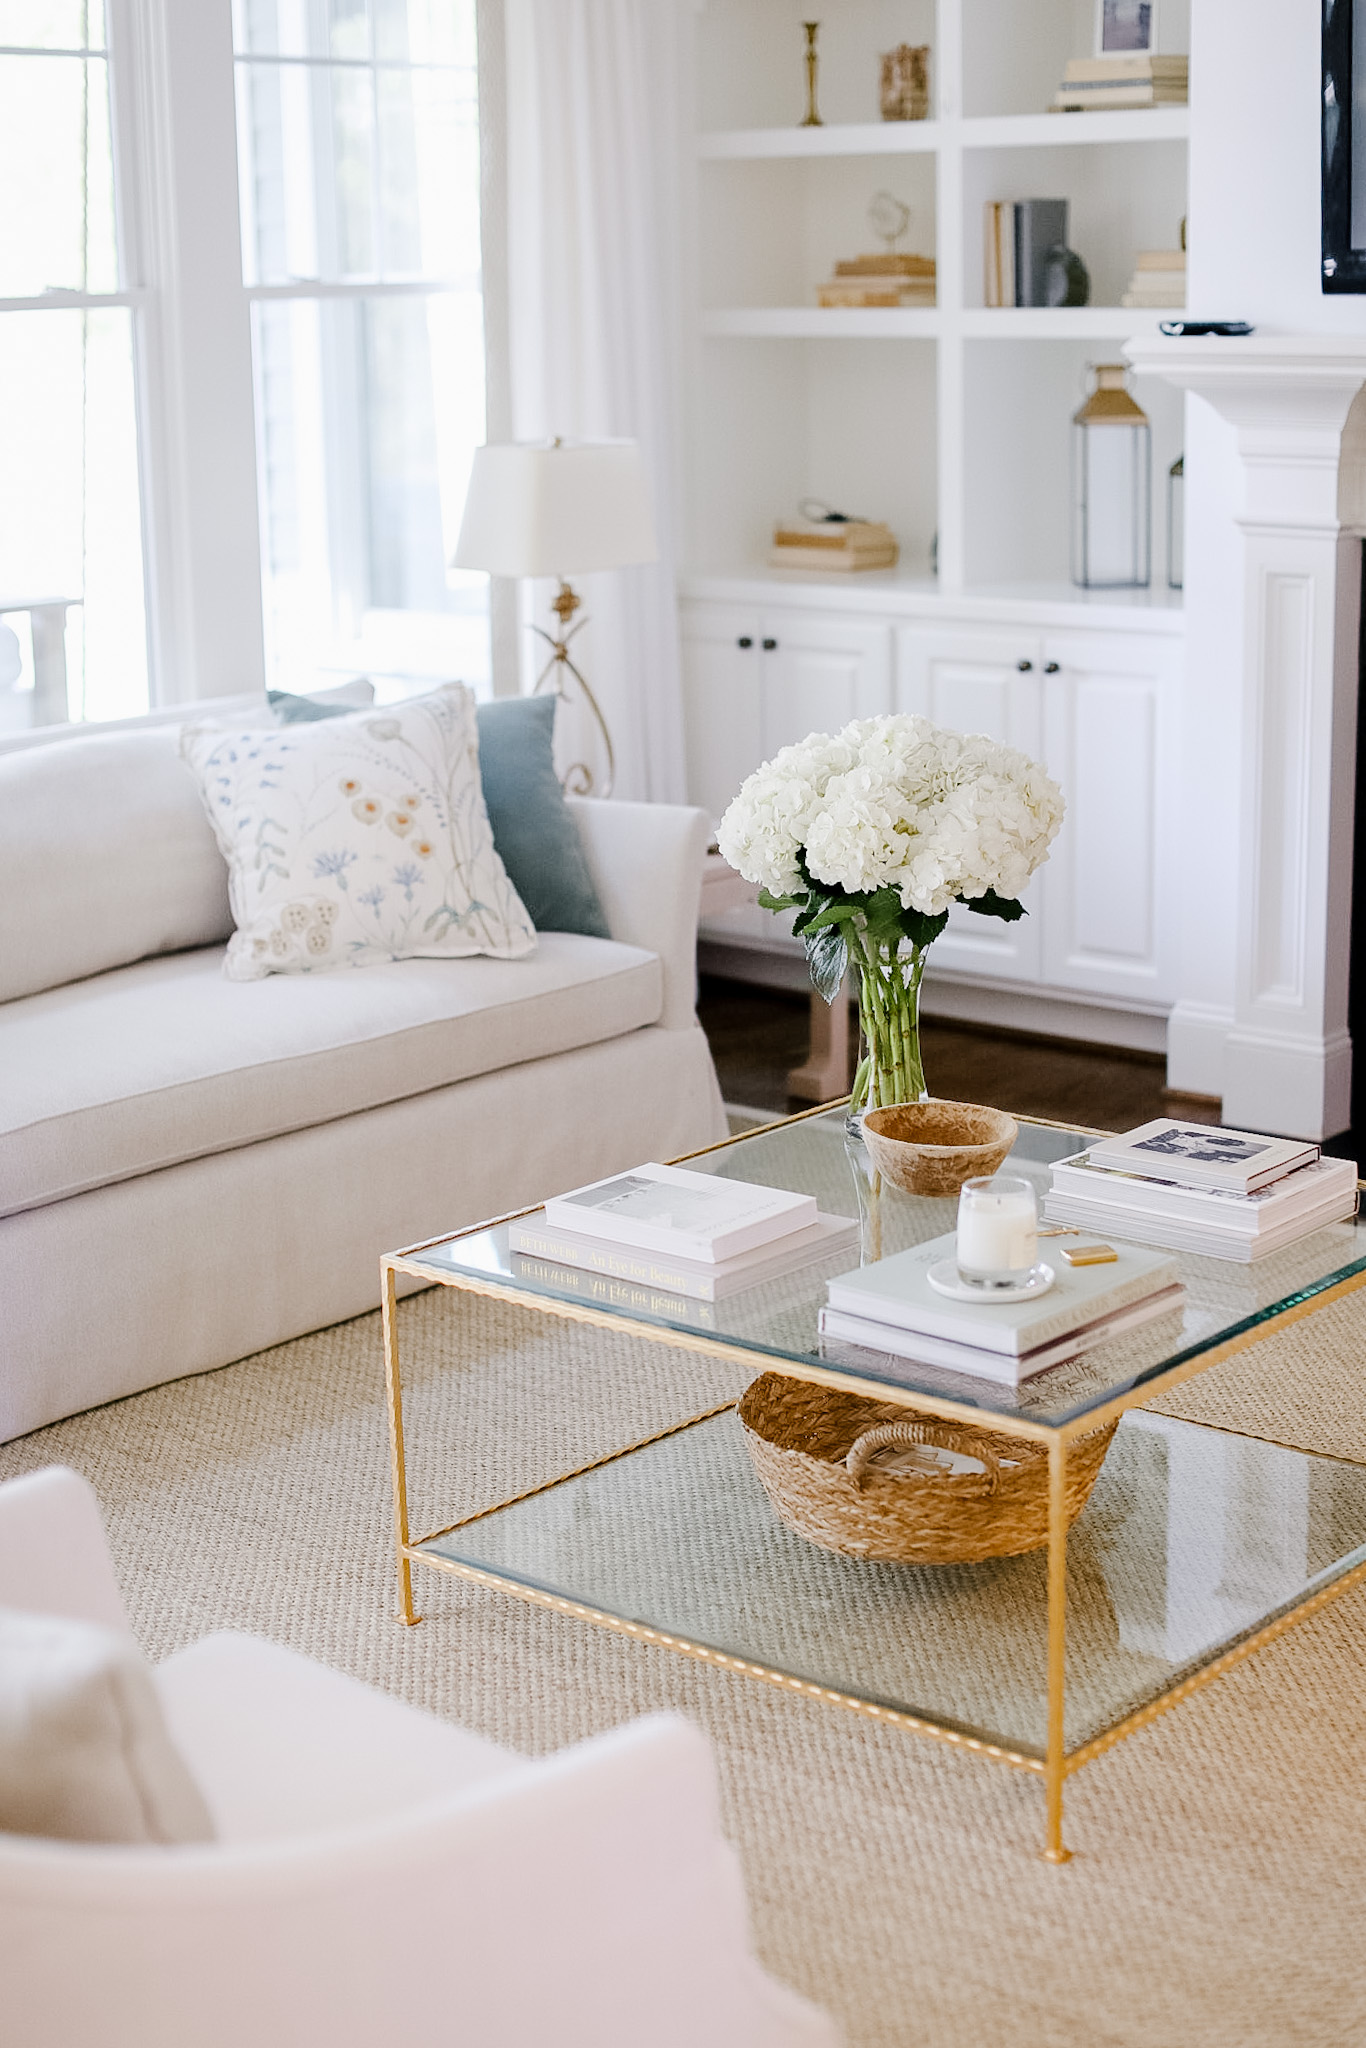 How To Decorate A Coffee Table 7 Tips, How To Decorate A Small Rectangular Coffee Table